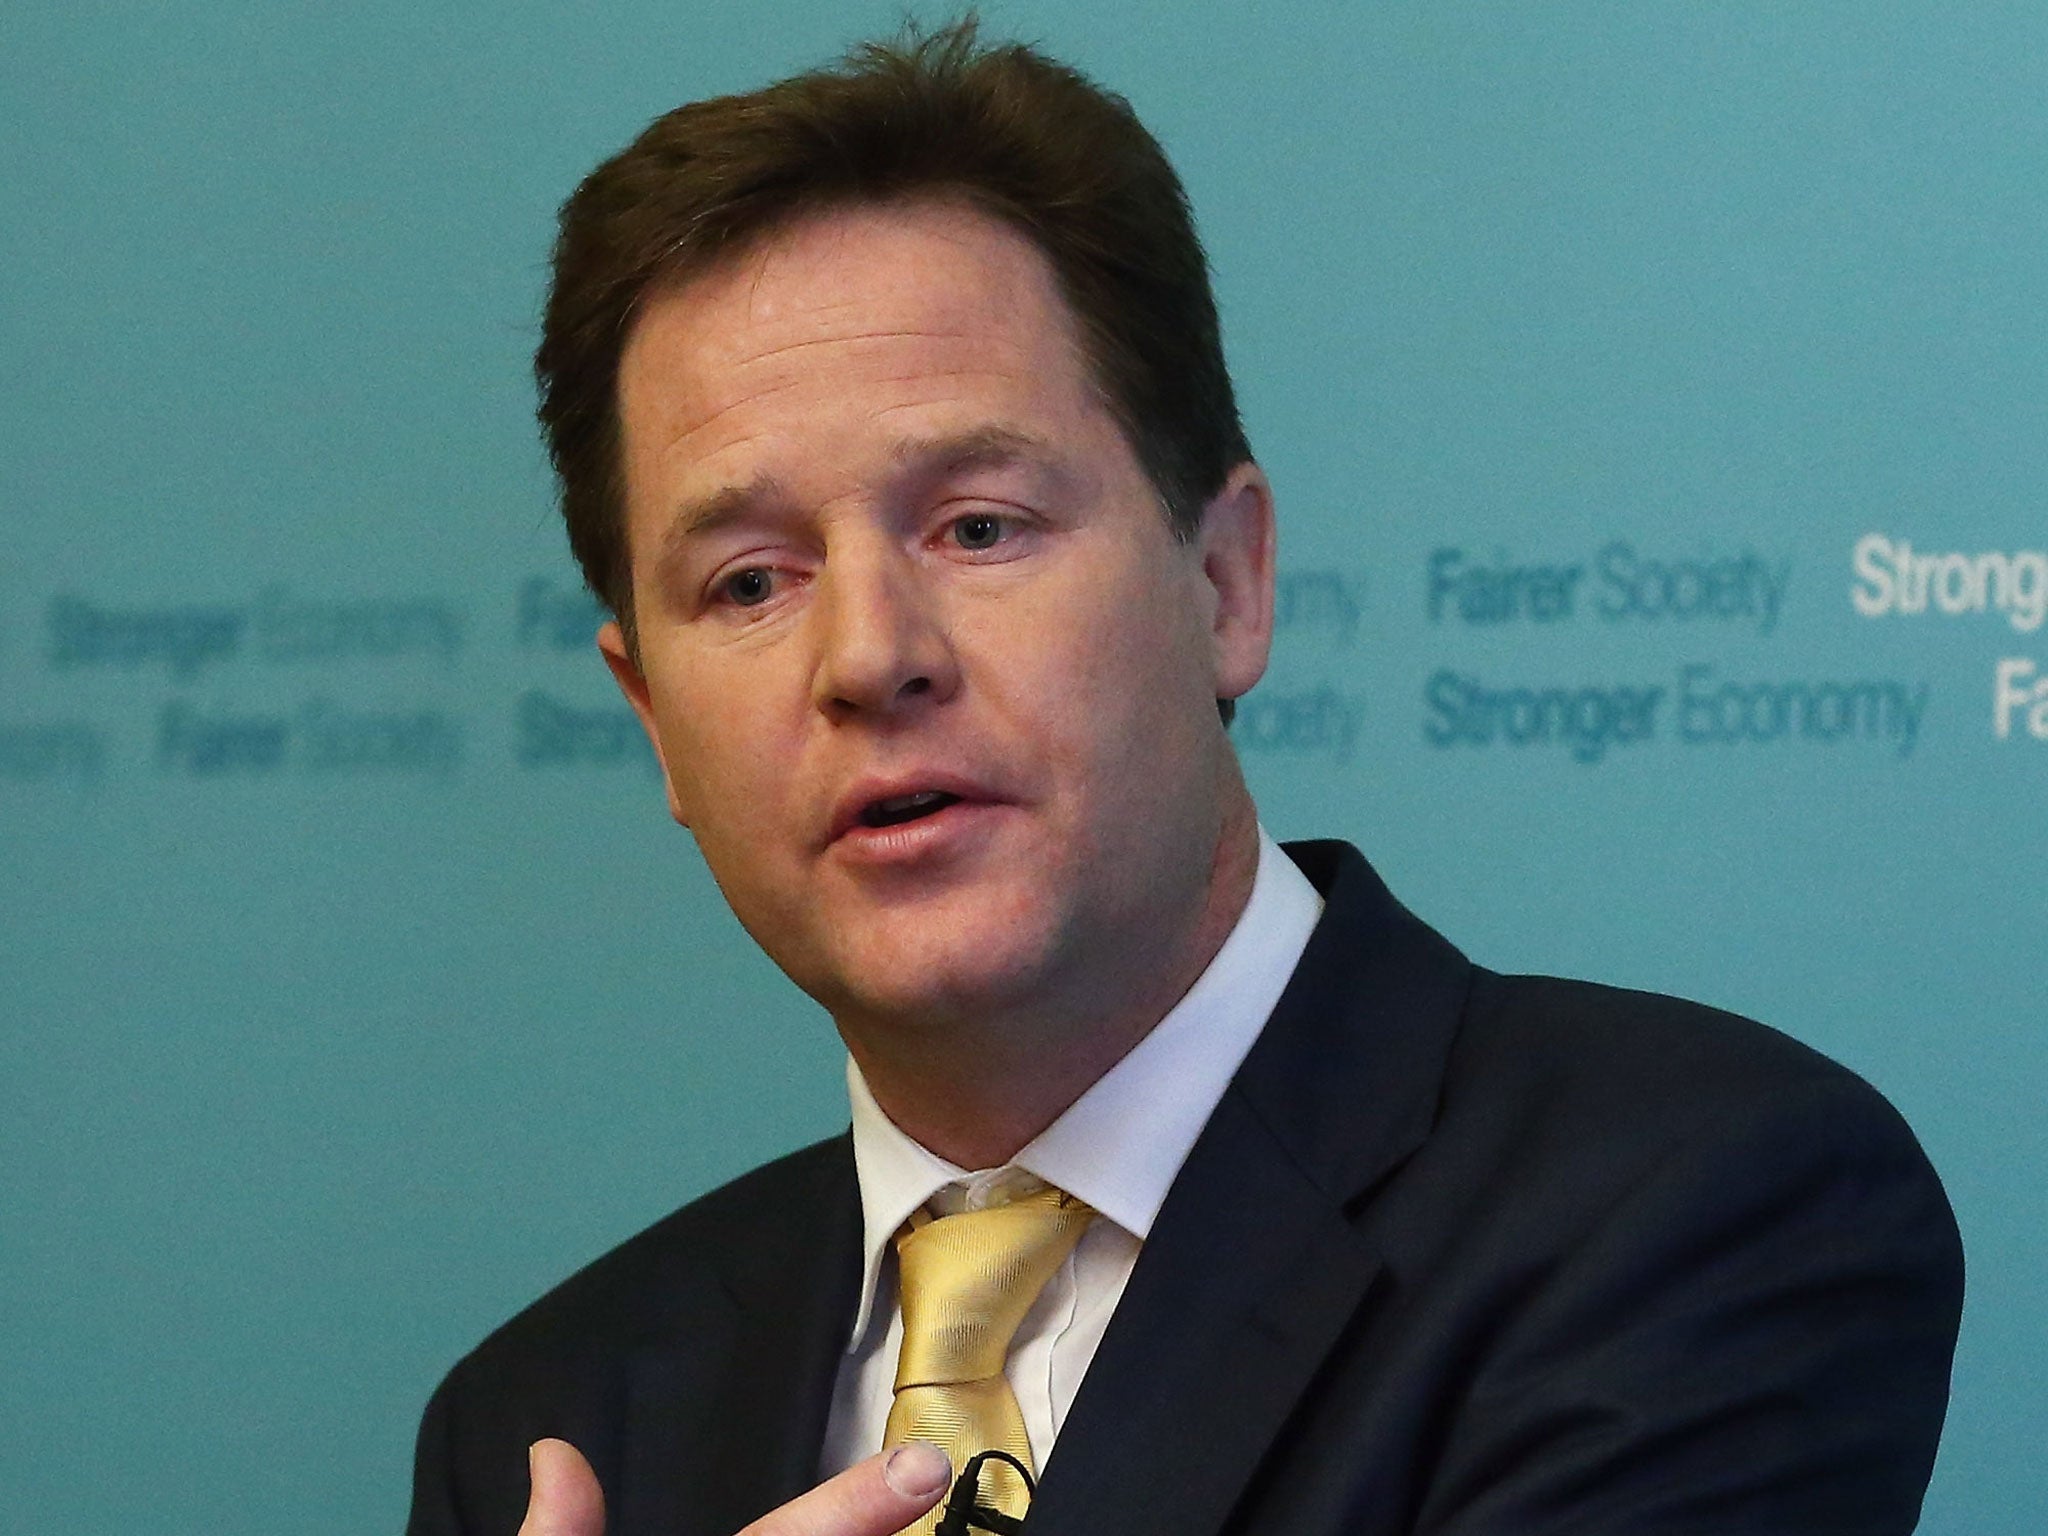 The speech should have been made by David Cameron. Revealingly, it was made by Nick Clegg